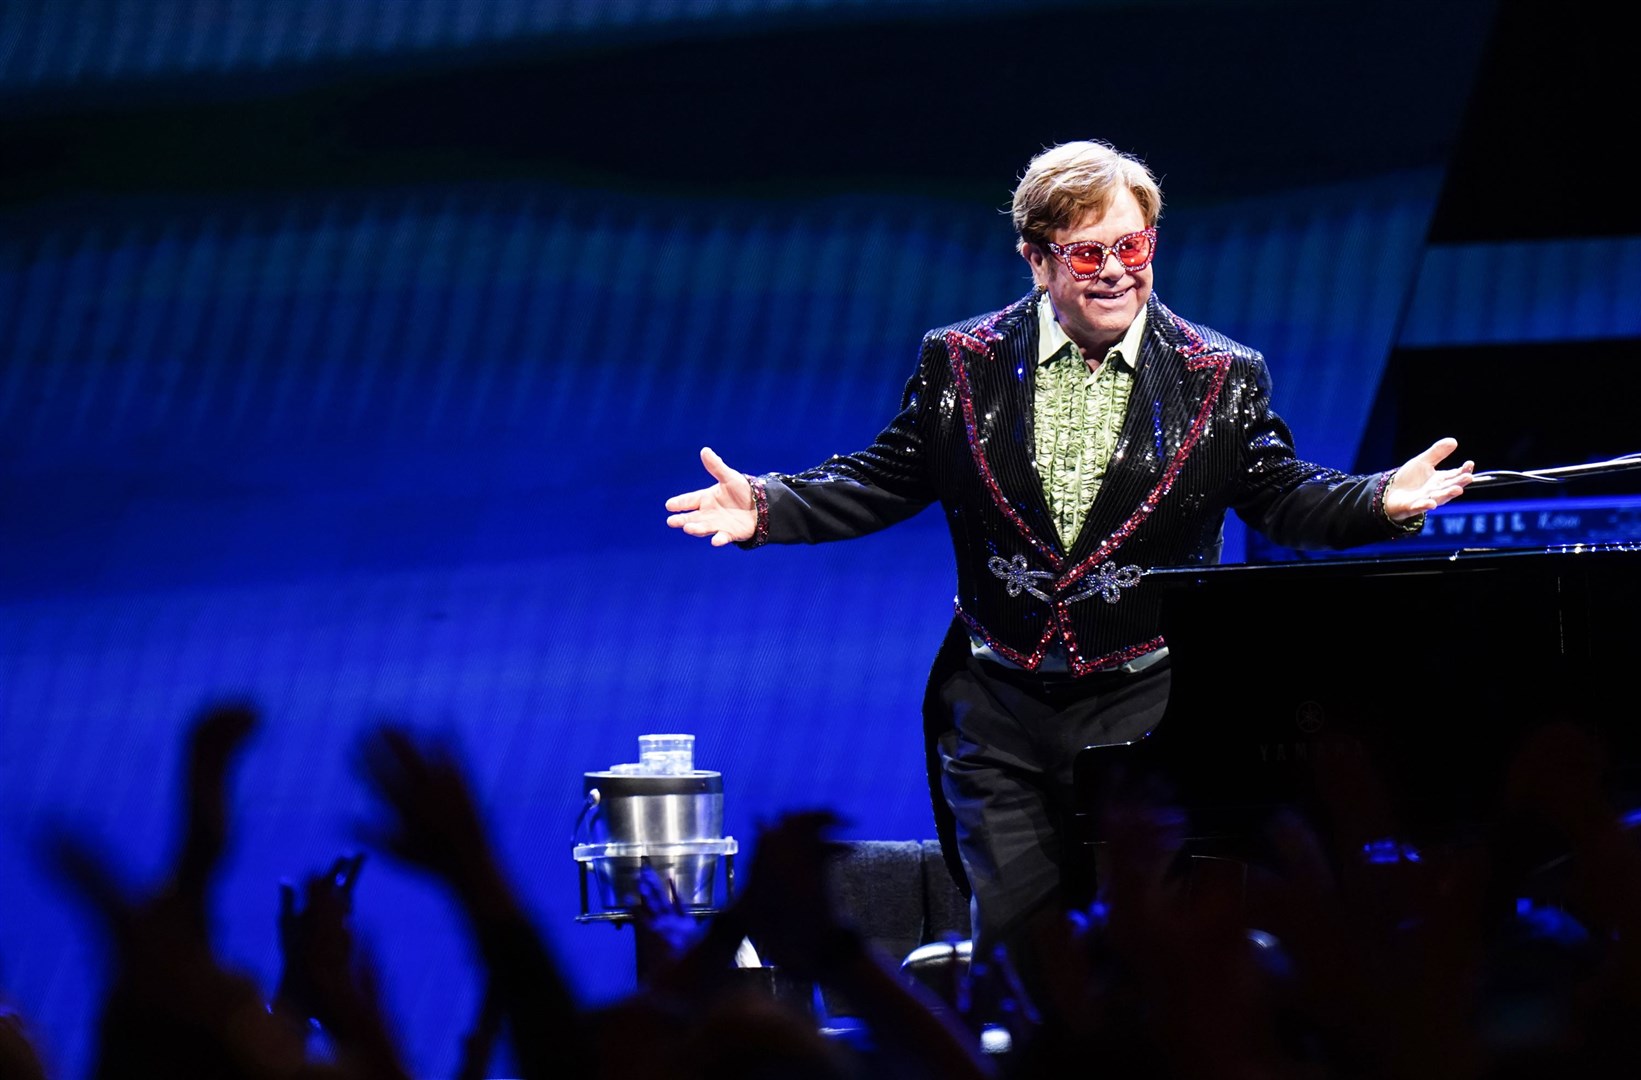 Sir Elton John will bring on four special guests during his headline show on Sunday. (Ian West/PA)